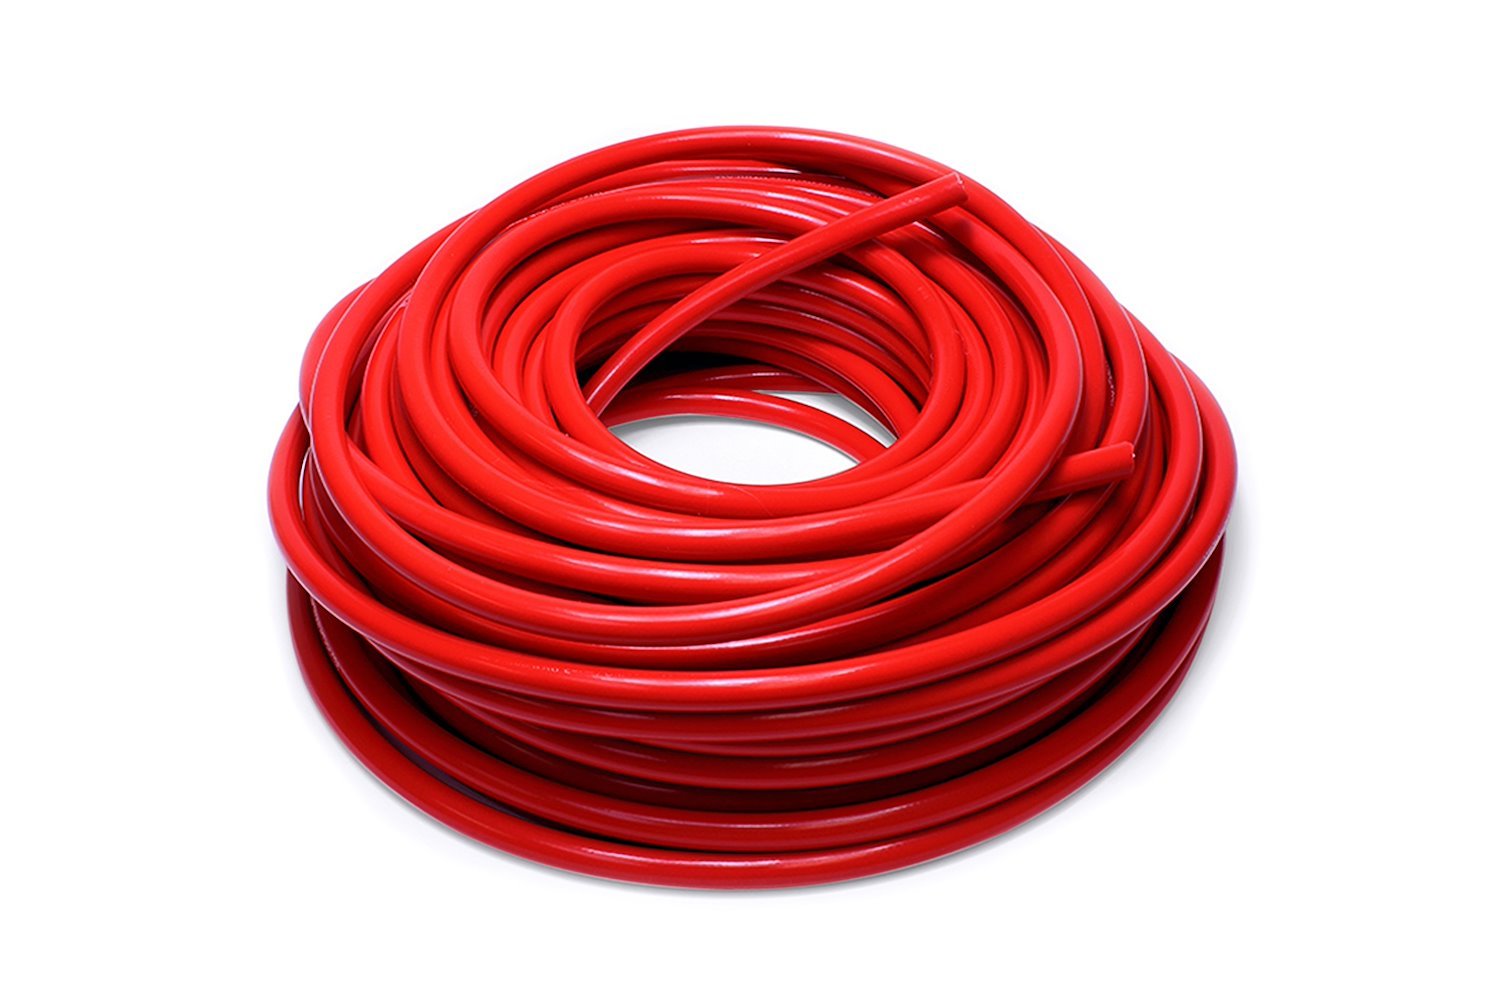 HTHH-025-REDx50 Silicone Heater Hose Tubing, High-Temp 1-Ply Reinforced, 1/4 in. ID, 50 ft. Roll, Red